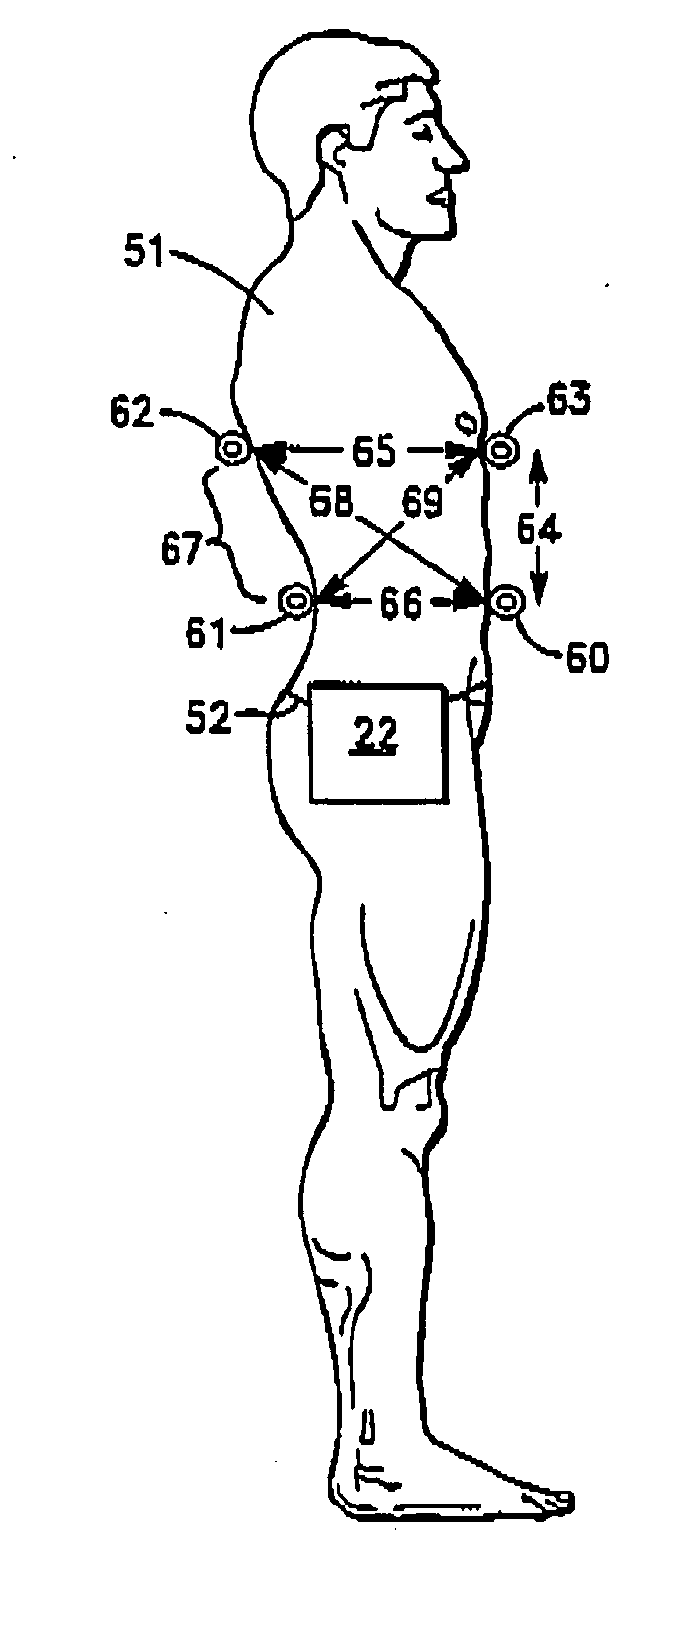 Noninvasive method and system for measuring pulmonary ventilation